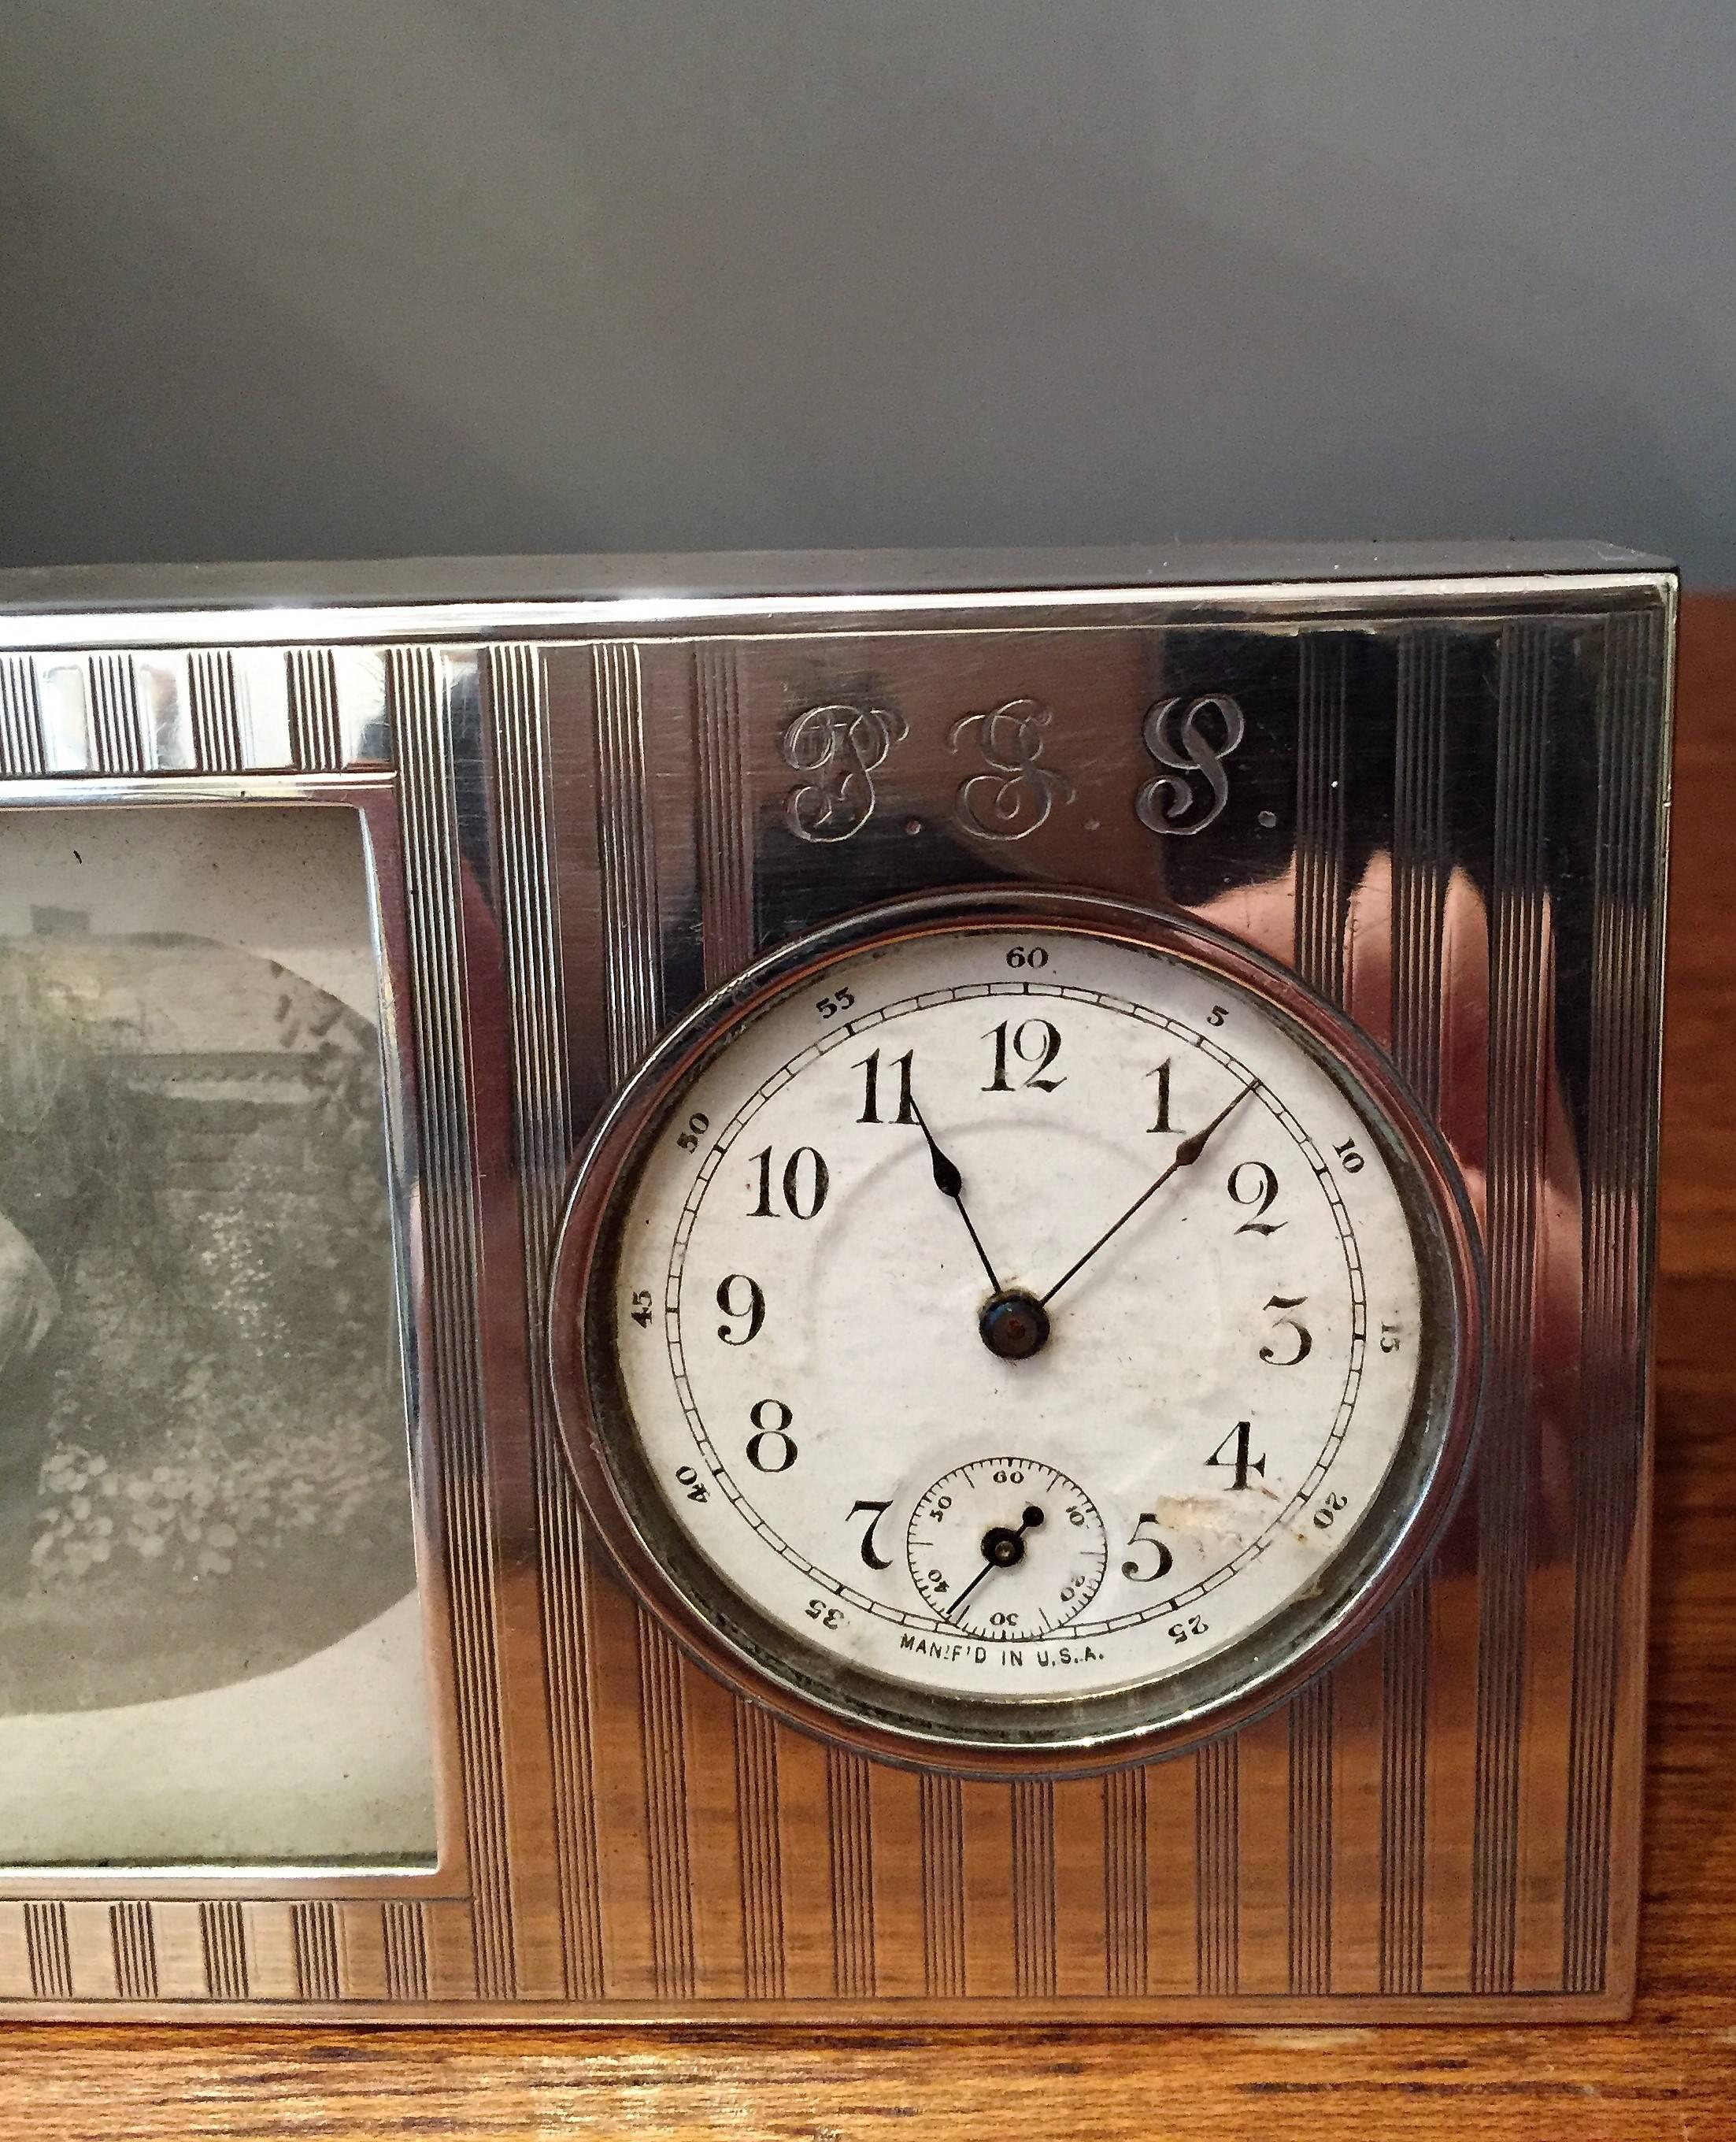 Lovely American silver desk clock, circa 1910.
The dial is made of paper (see photo)
The movement is working (I don't know how long).